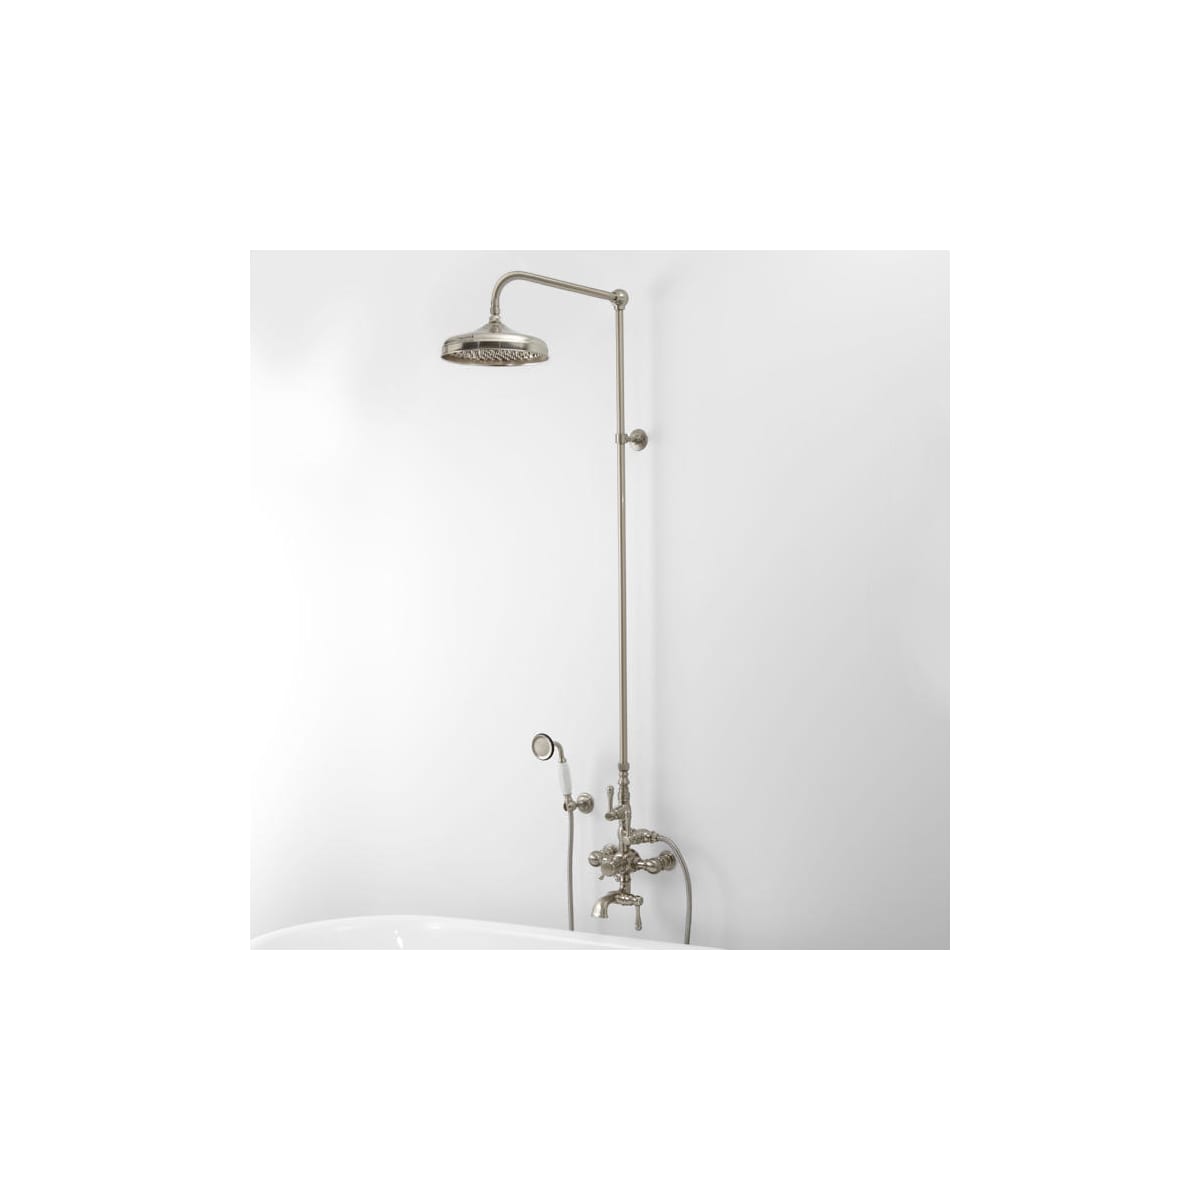 Signature Hardware 158075 Thermostatic Shower System with